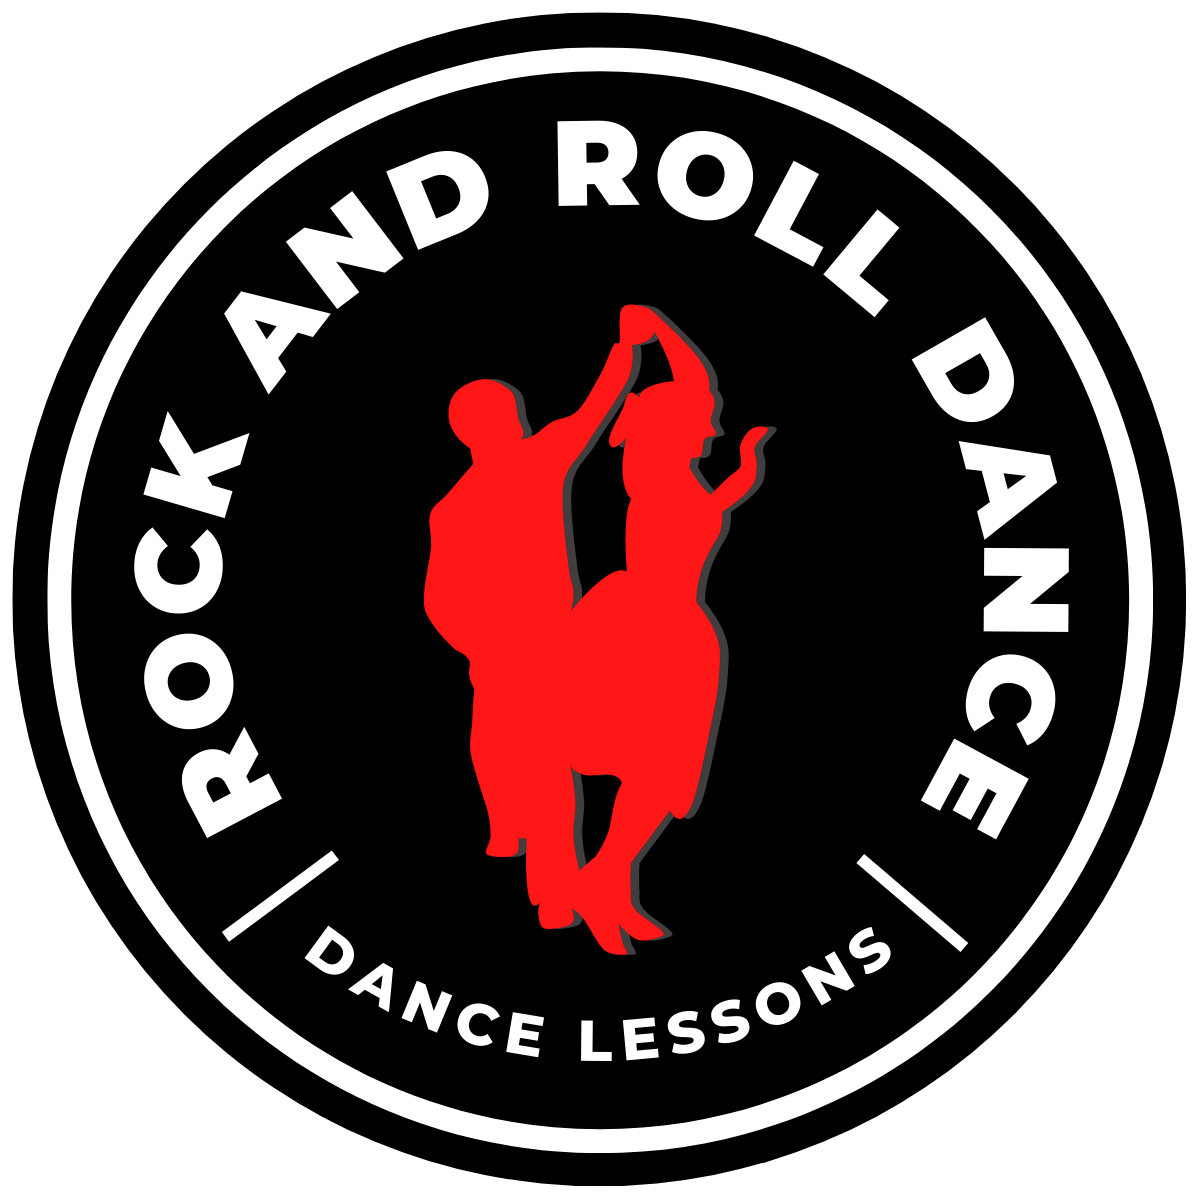 Rock and Roll Dance Lessons